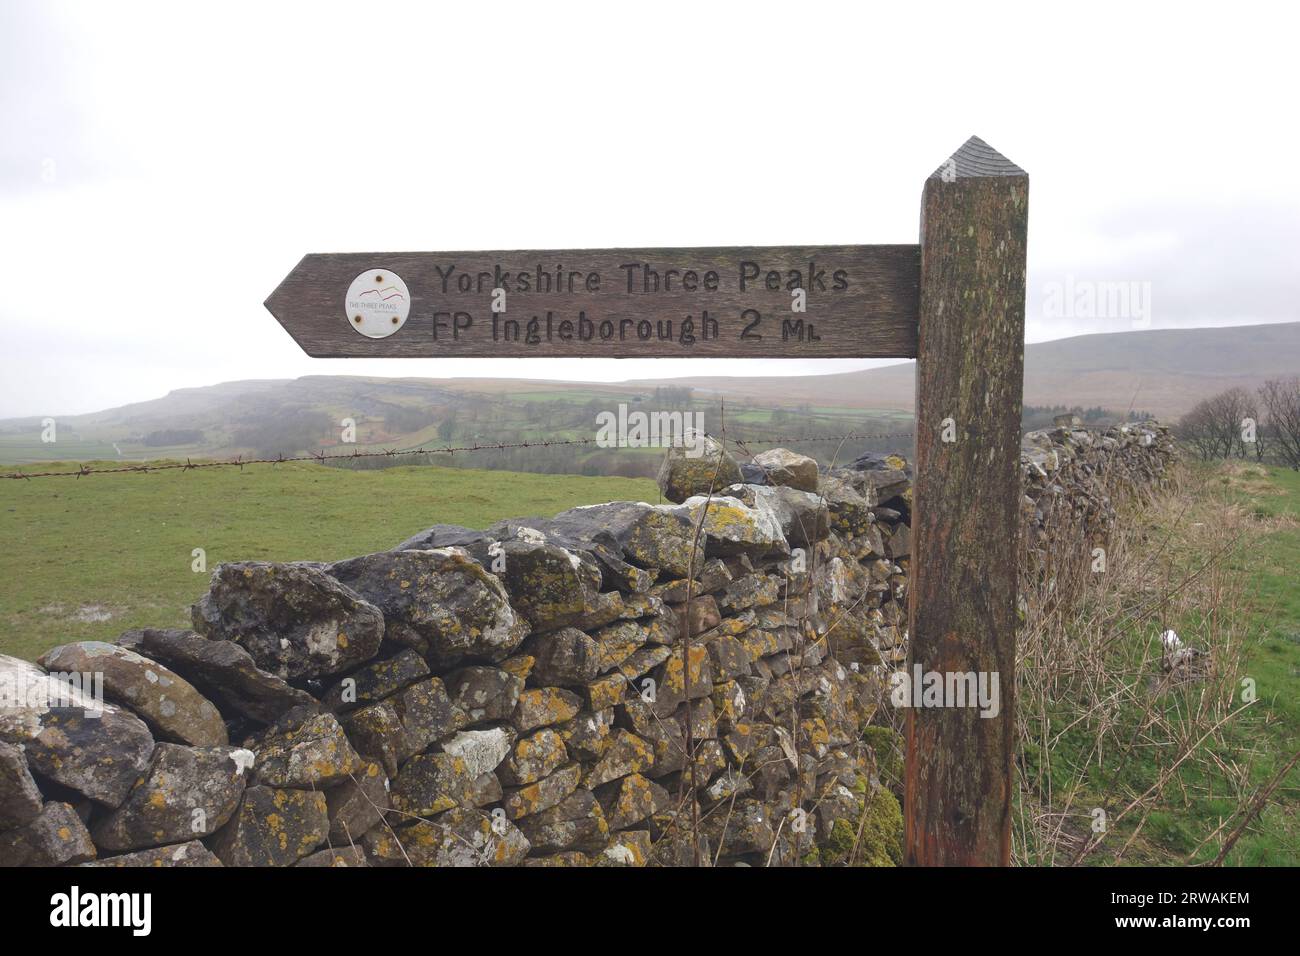 Wooden Signpost for Footpath to Ingleborough and the Yorkshire Three Peaks from Chapel-le-dale, Yorkshire Dales National Park, Inghilterra, Regno Unito. Foto Stock